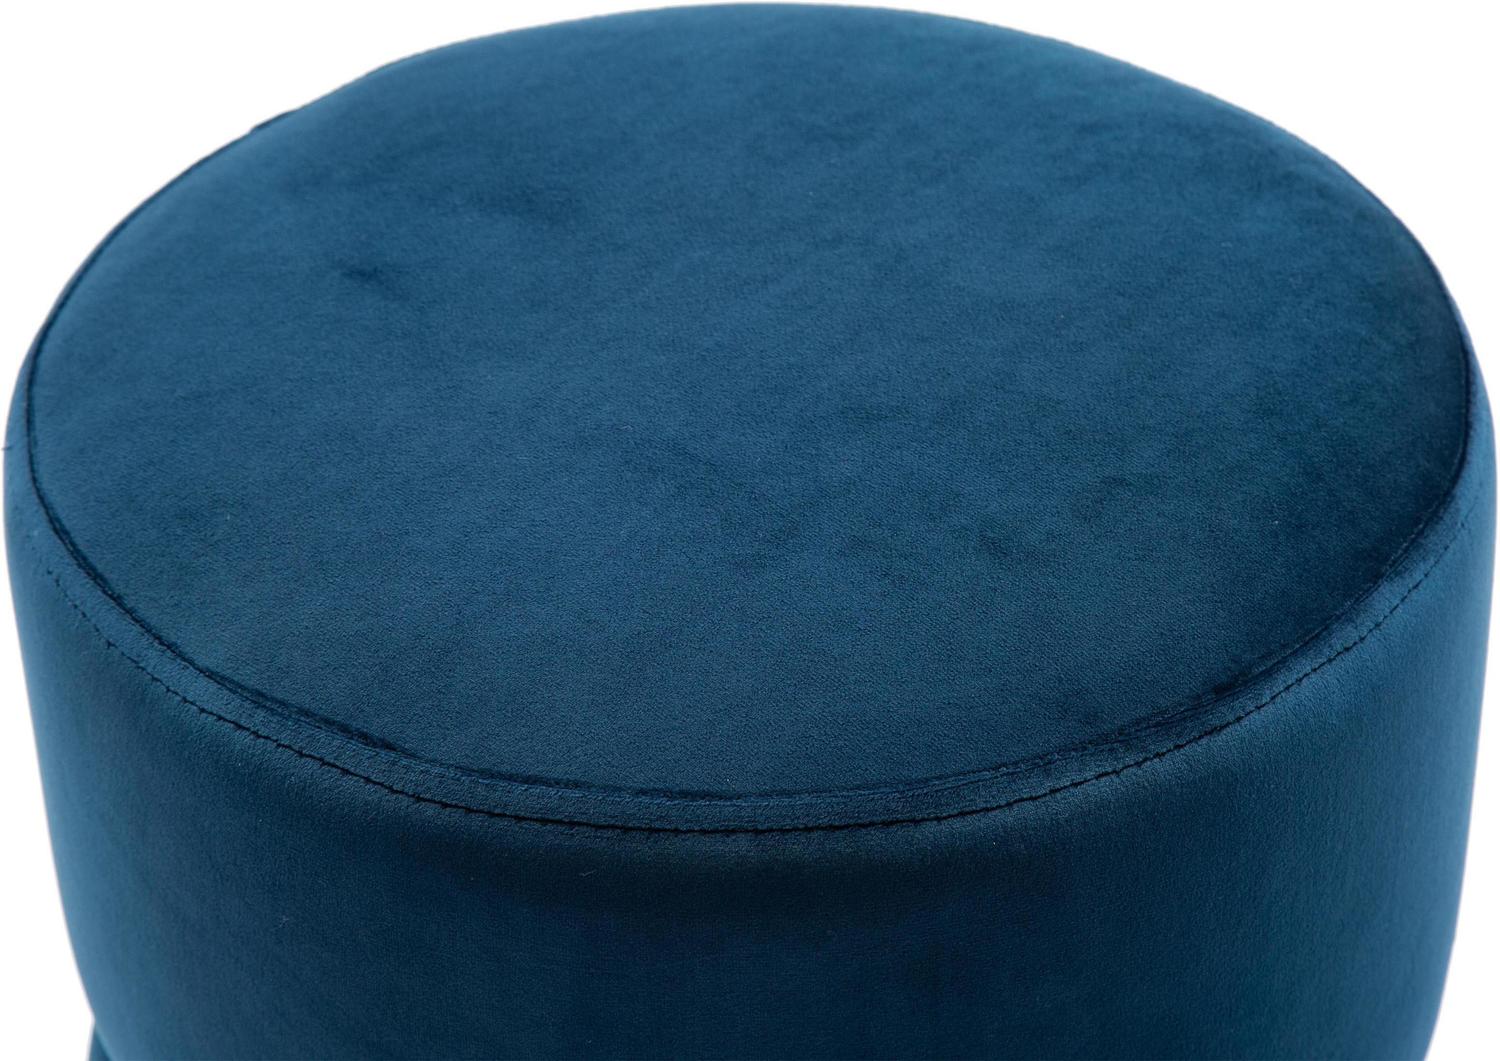 ottoman leather bench Contemporary Design Furniture Ottomans Navy